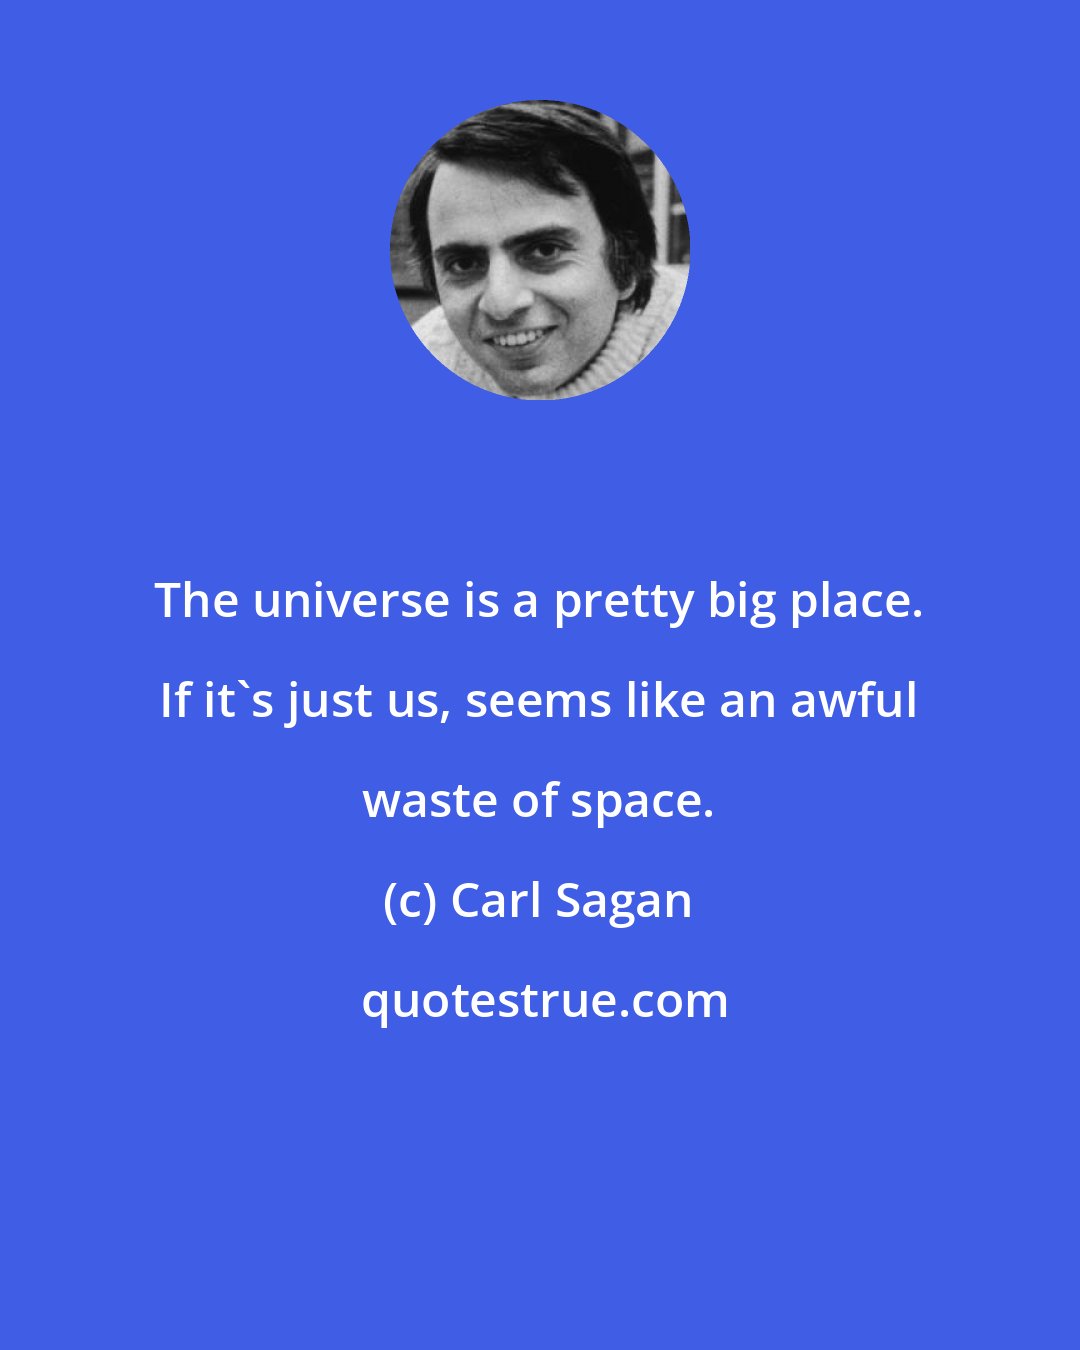 Carl Sagan: The universe is a pretty big place. If it's just us, seems like an awful waste of space.